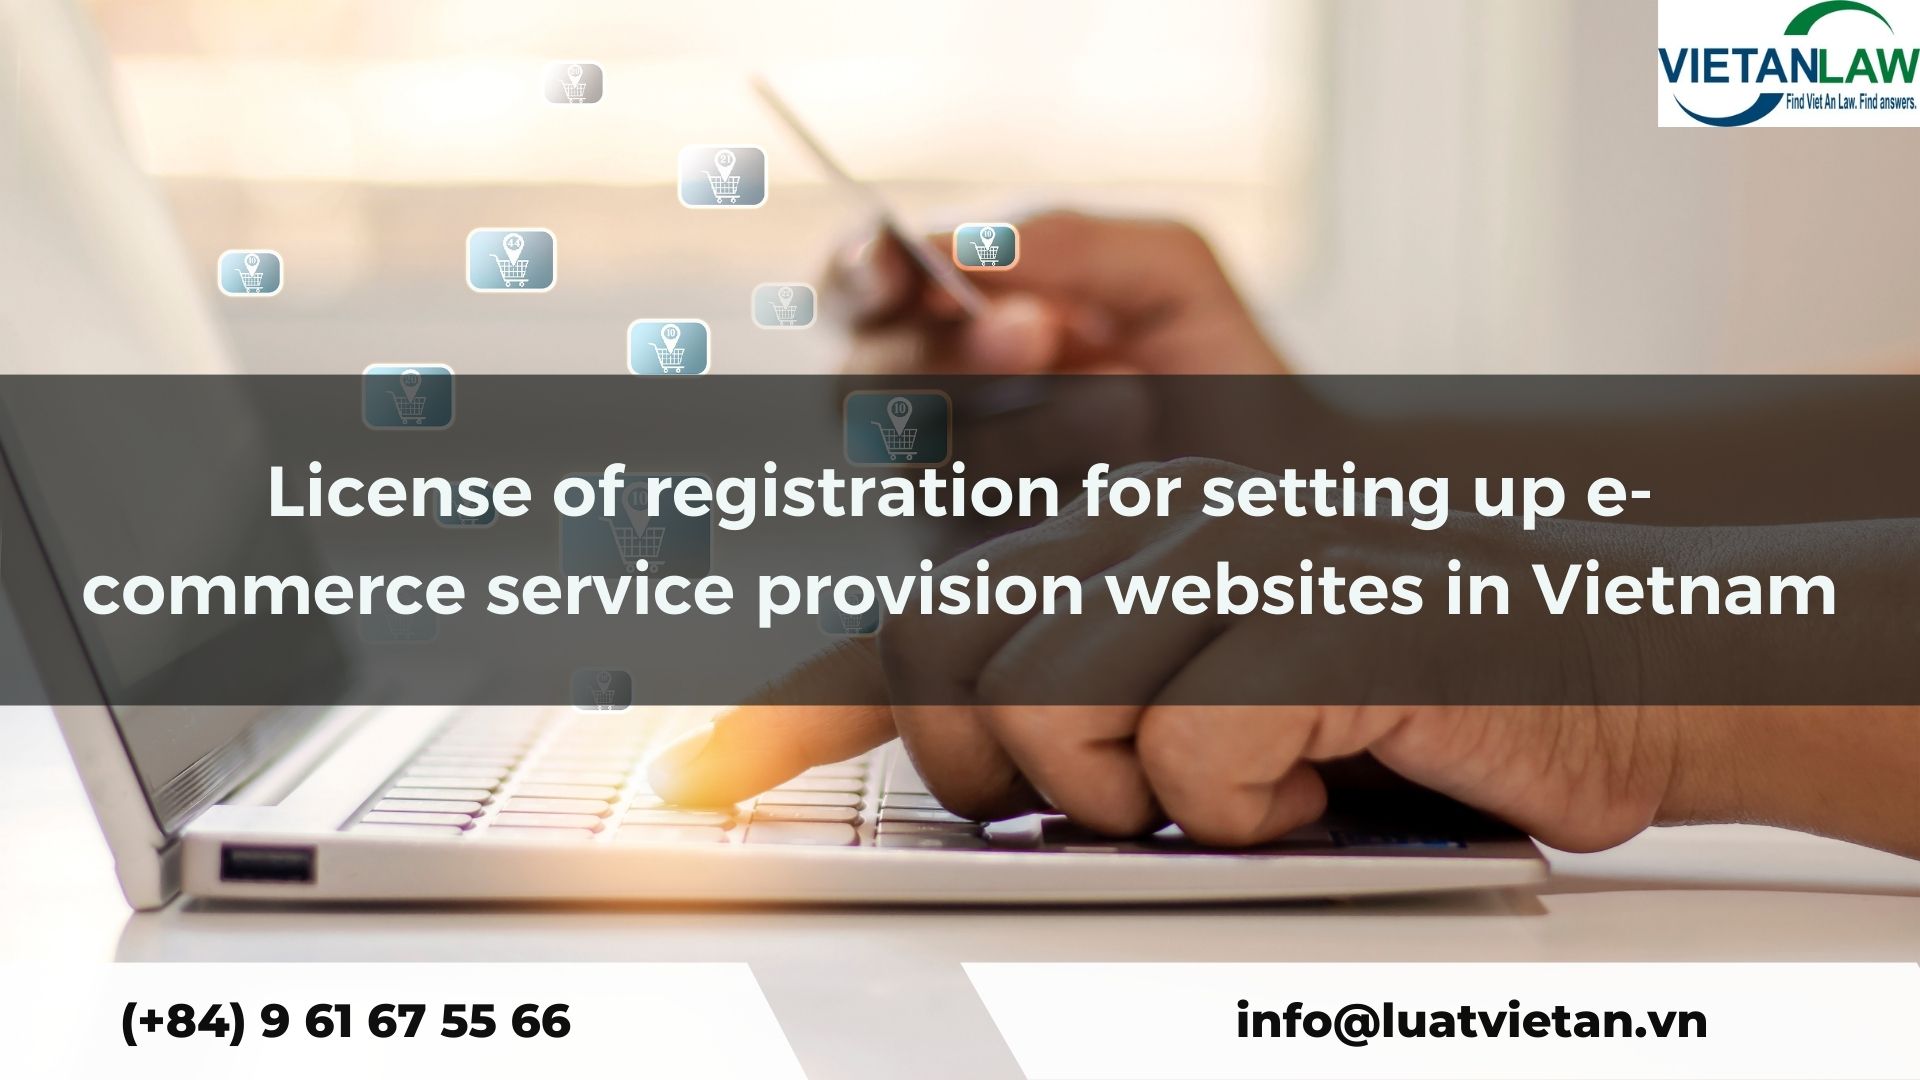 License of registration for setting up e-commerce service provision websites in Vietnam